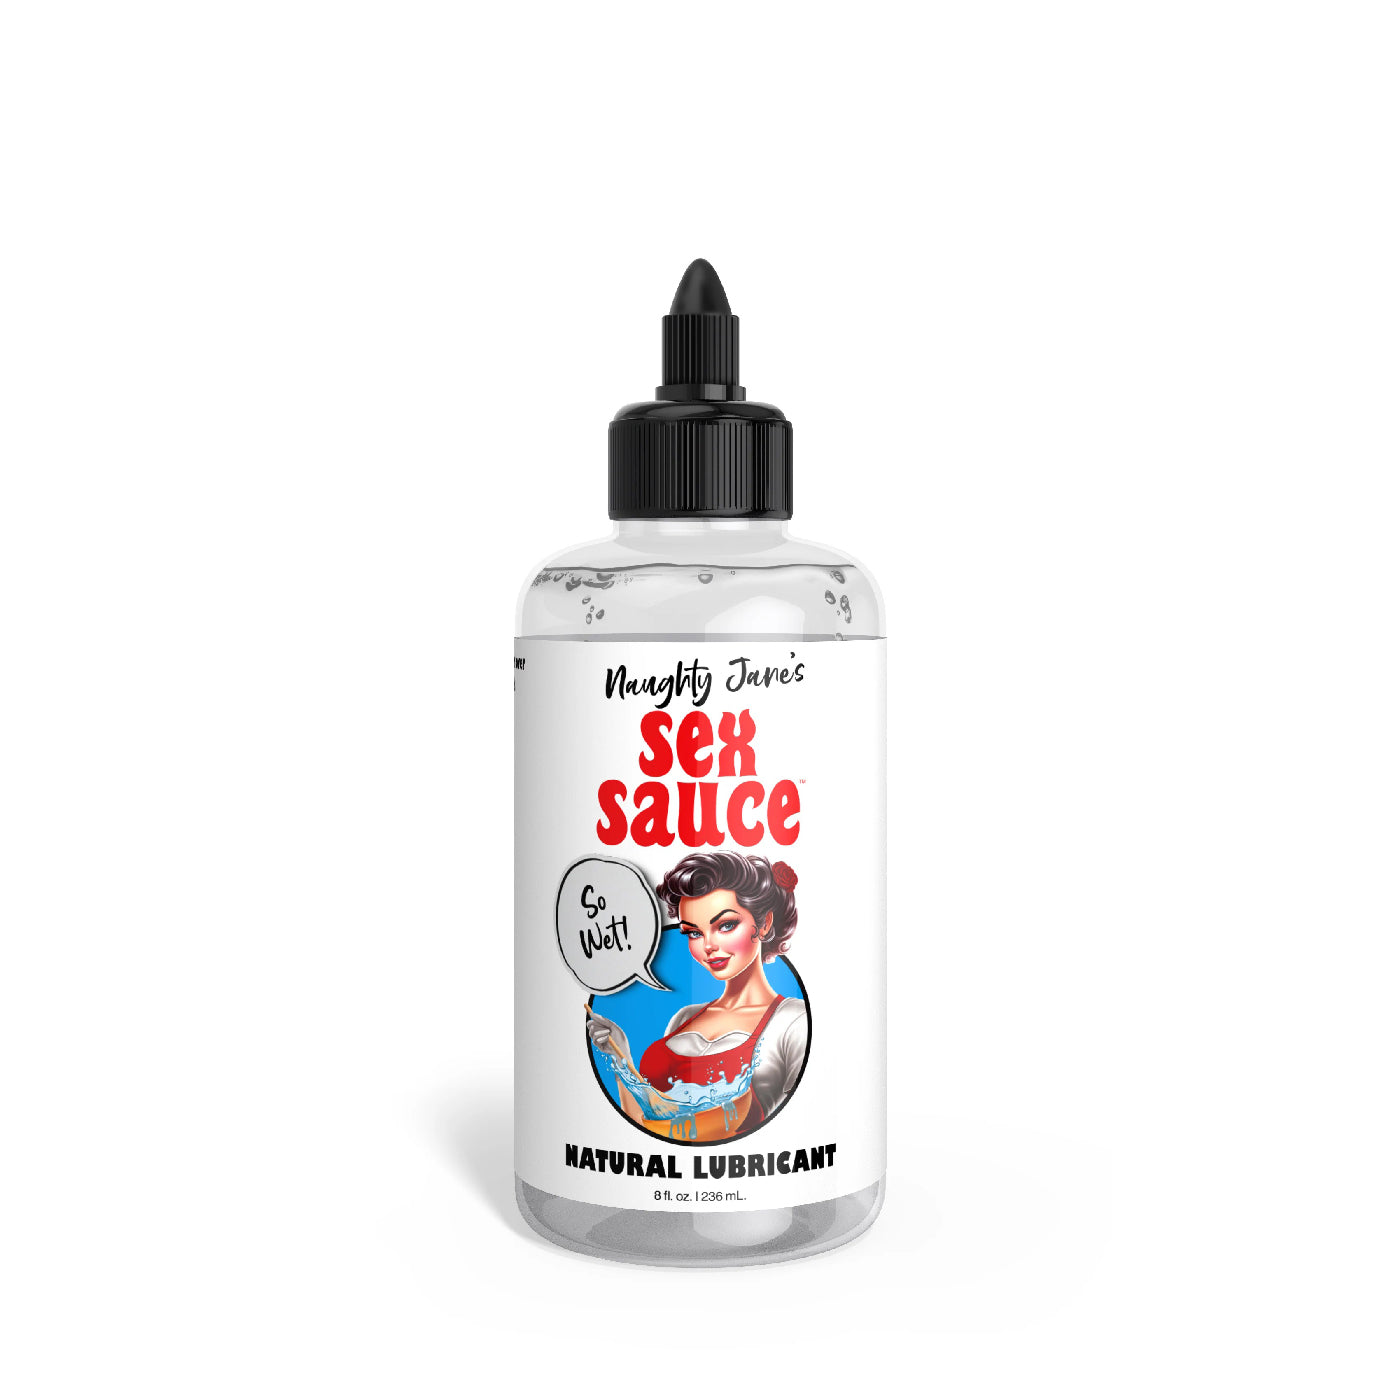 Naughty Jane's Sex Sauce Natural Lubricant 8oz-3